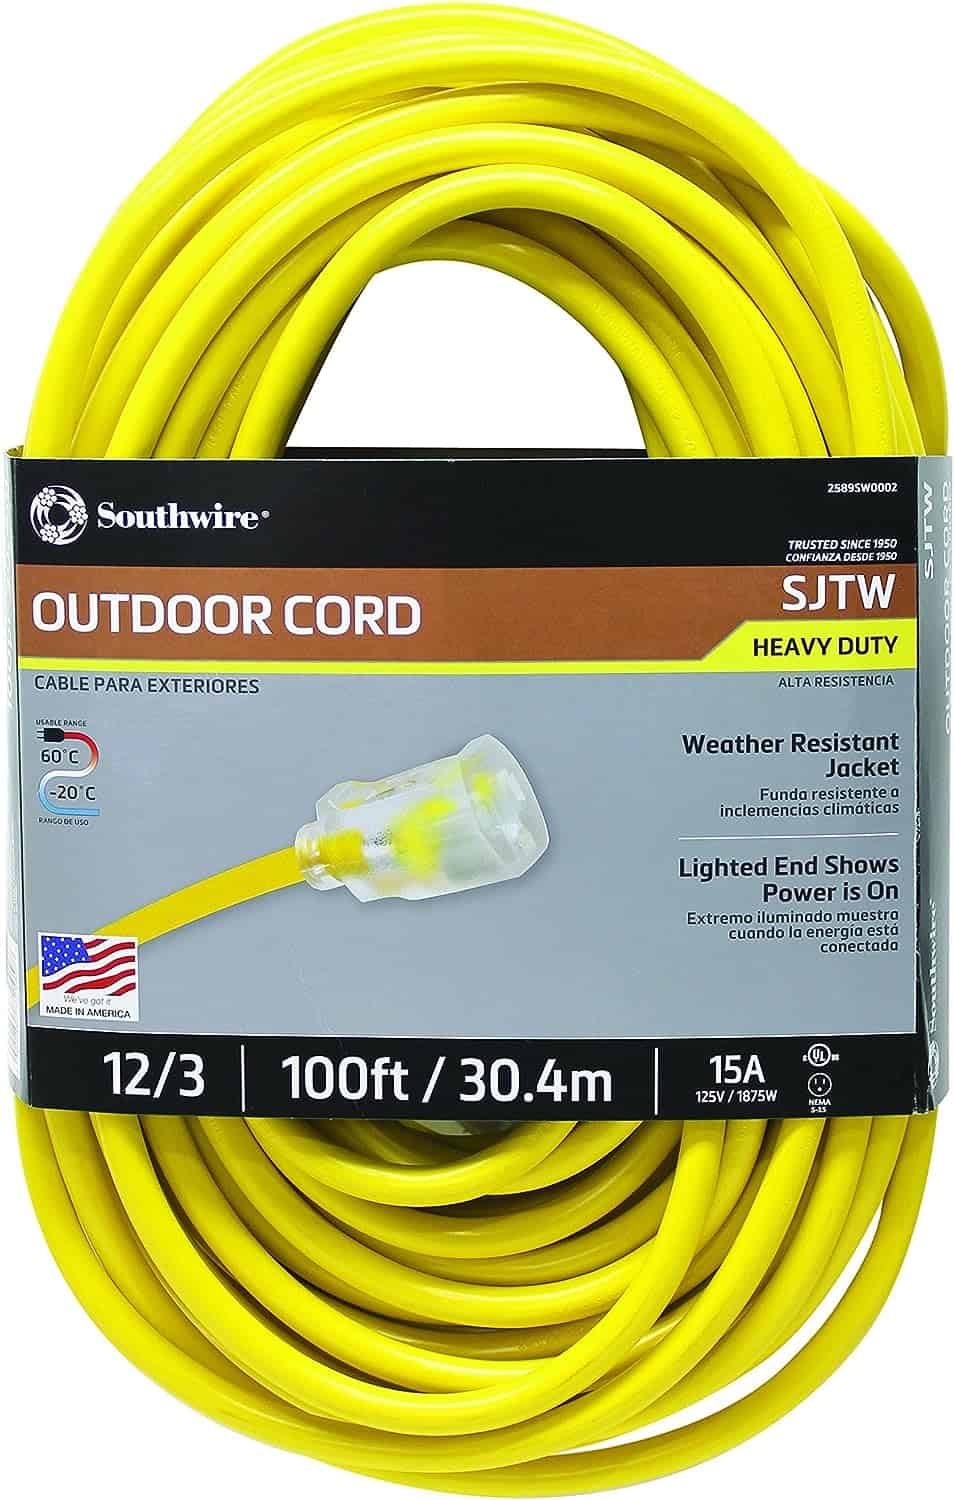 Southwire 25890002 2589SW0002 Outdoor Cord-12 3 SJTW Heavy Duty 3 Prong Extension Cord, Water Resistant Vinyl Jacket, for Commercial Use and Major Appliances, Foot, Yellow, 100 Feet, Ft 5